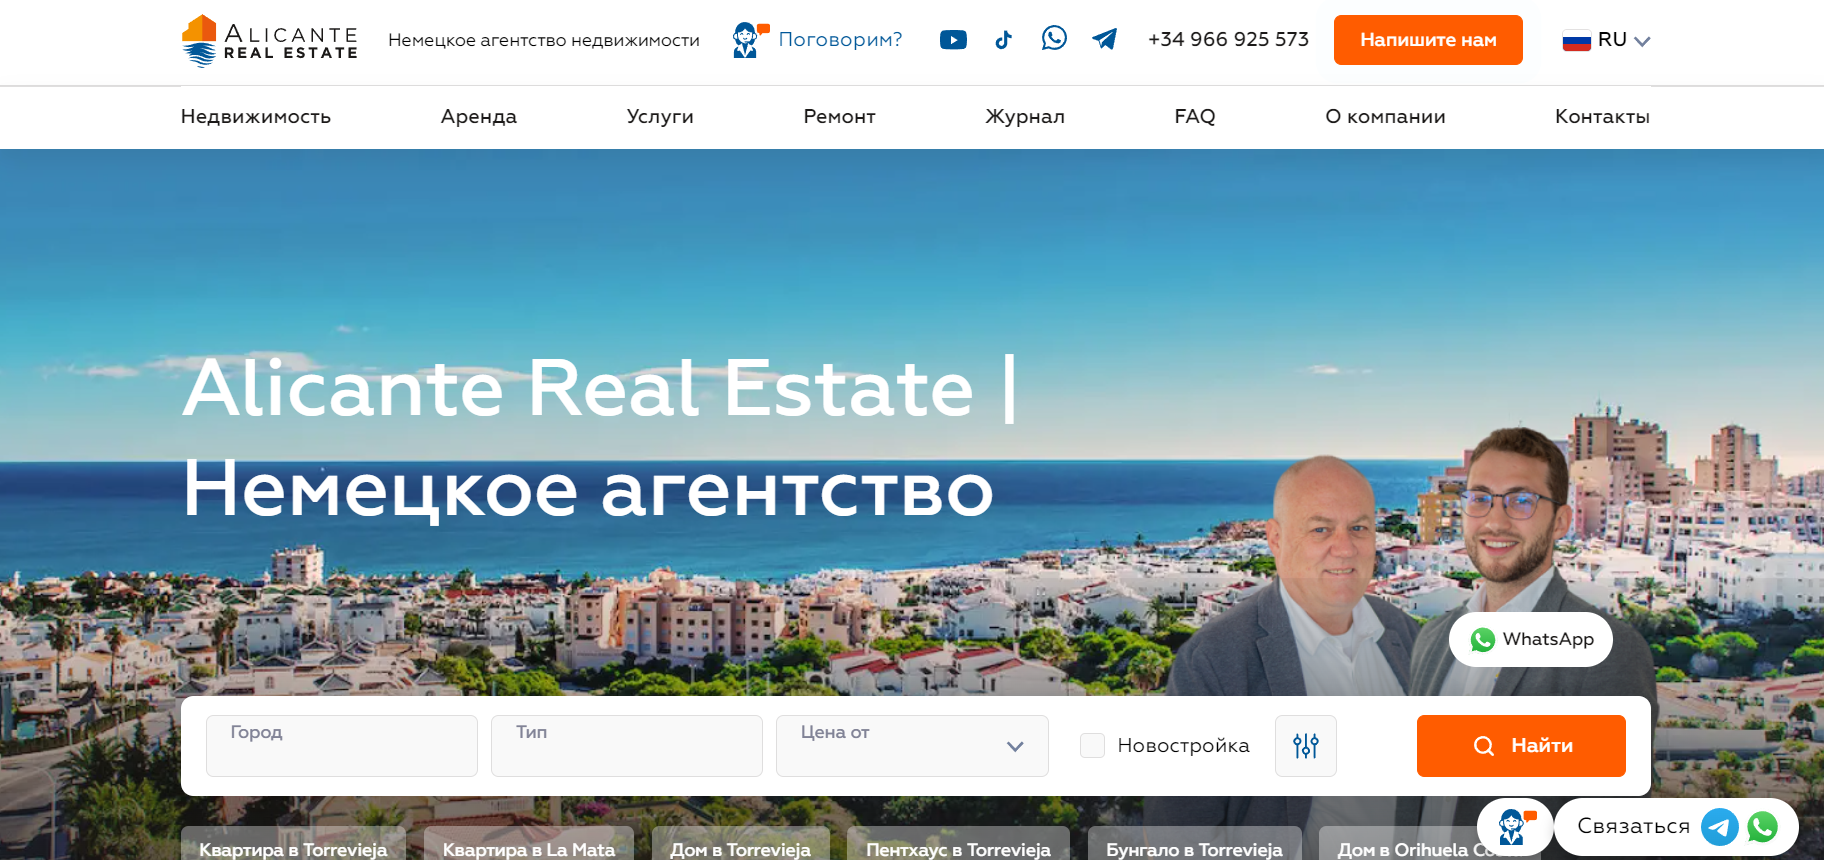 Pitfalls of Real Estate Acquisition: Real Experience with Alicante Real Estate